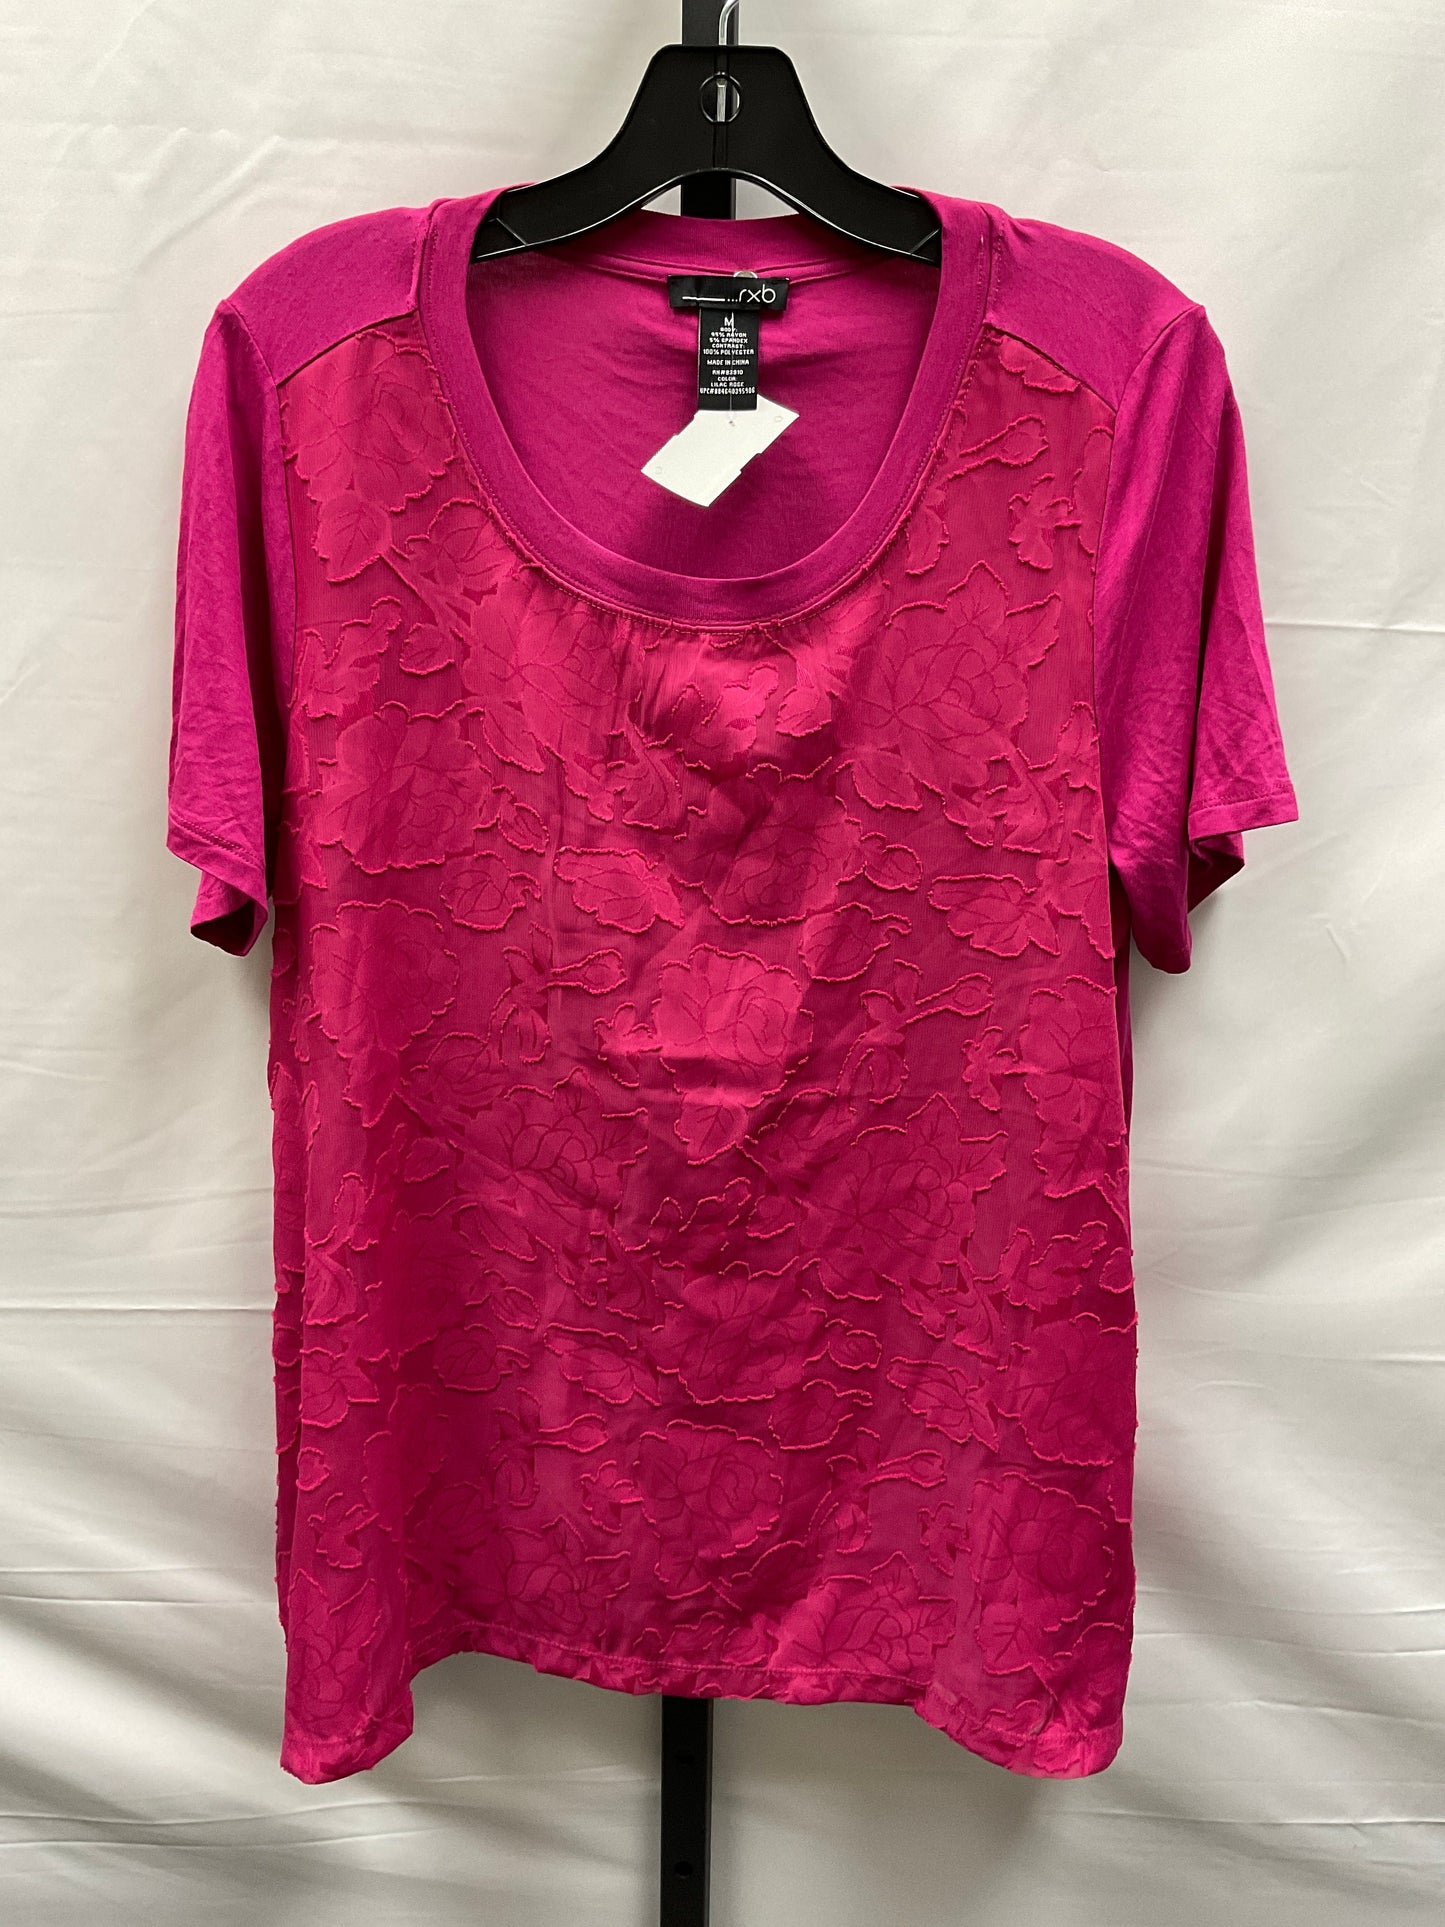 Pink Top Short Sleeve Rxb, Size M